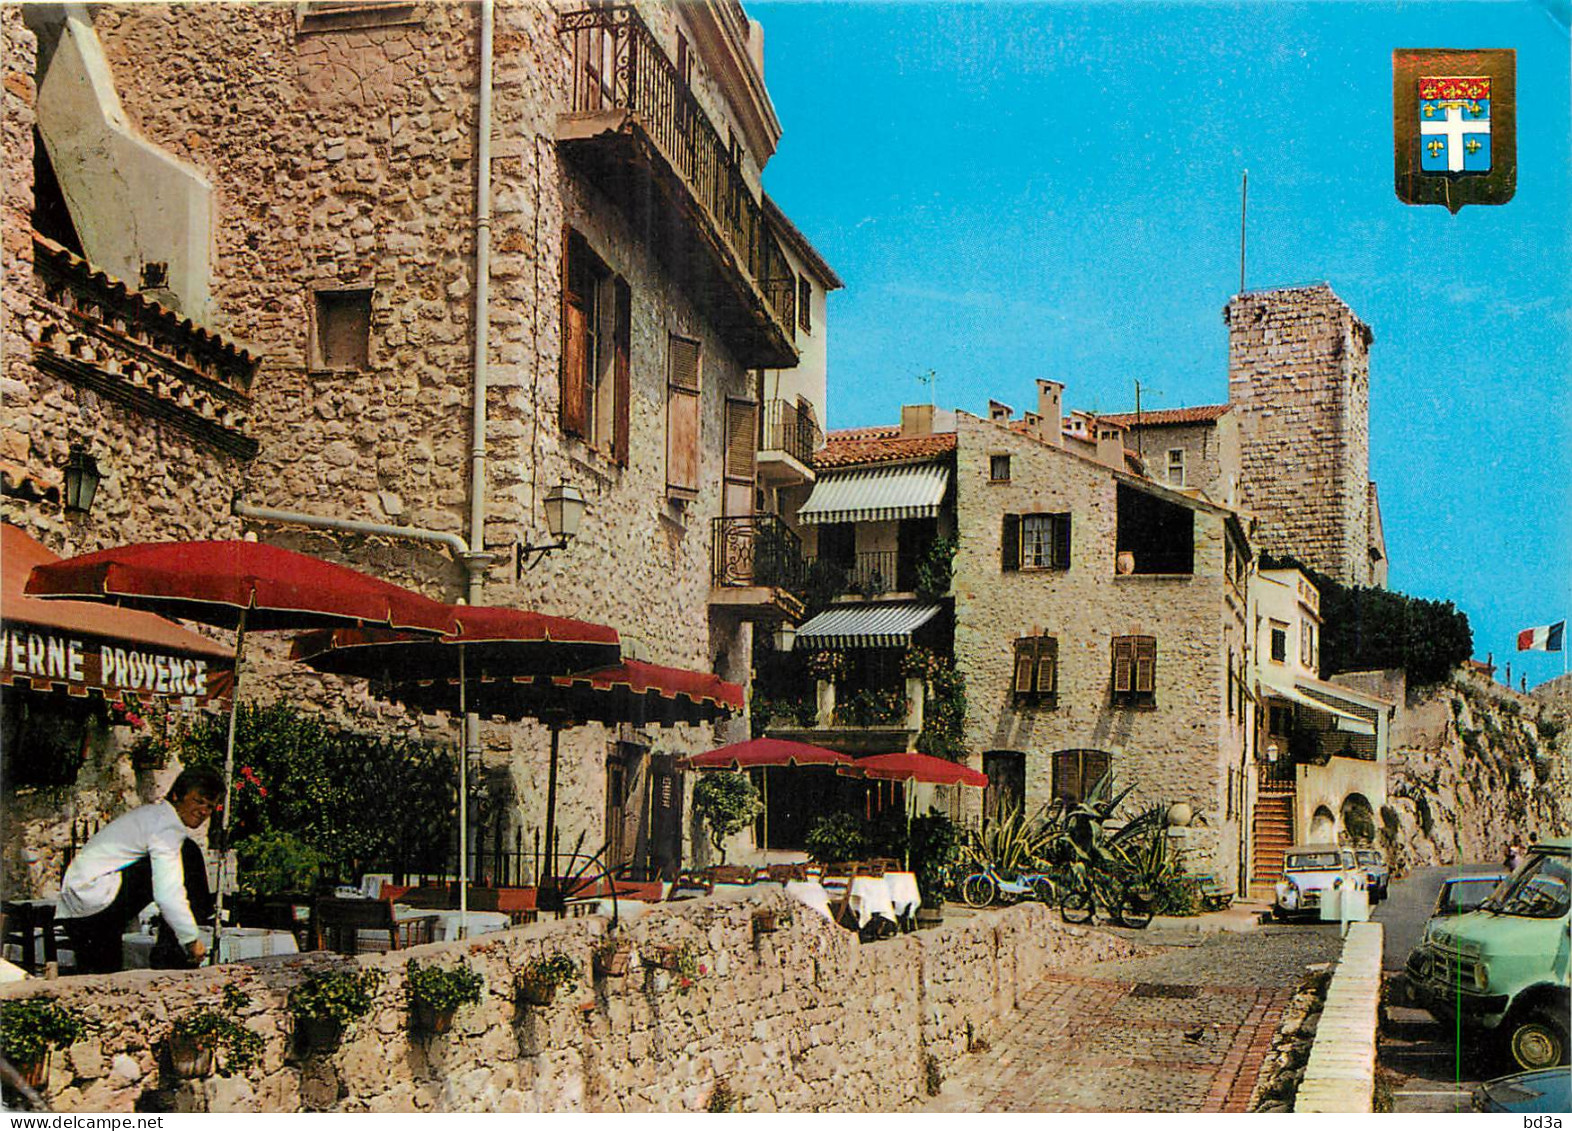 06 - ANTIBES - Antibes - Les Remparts